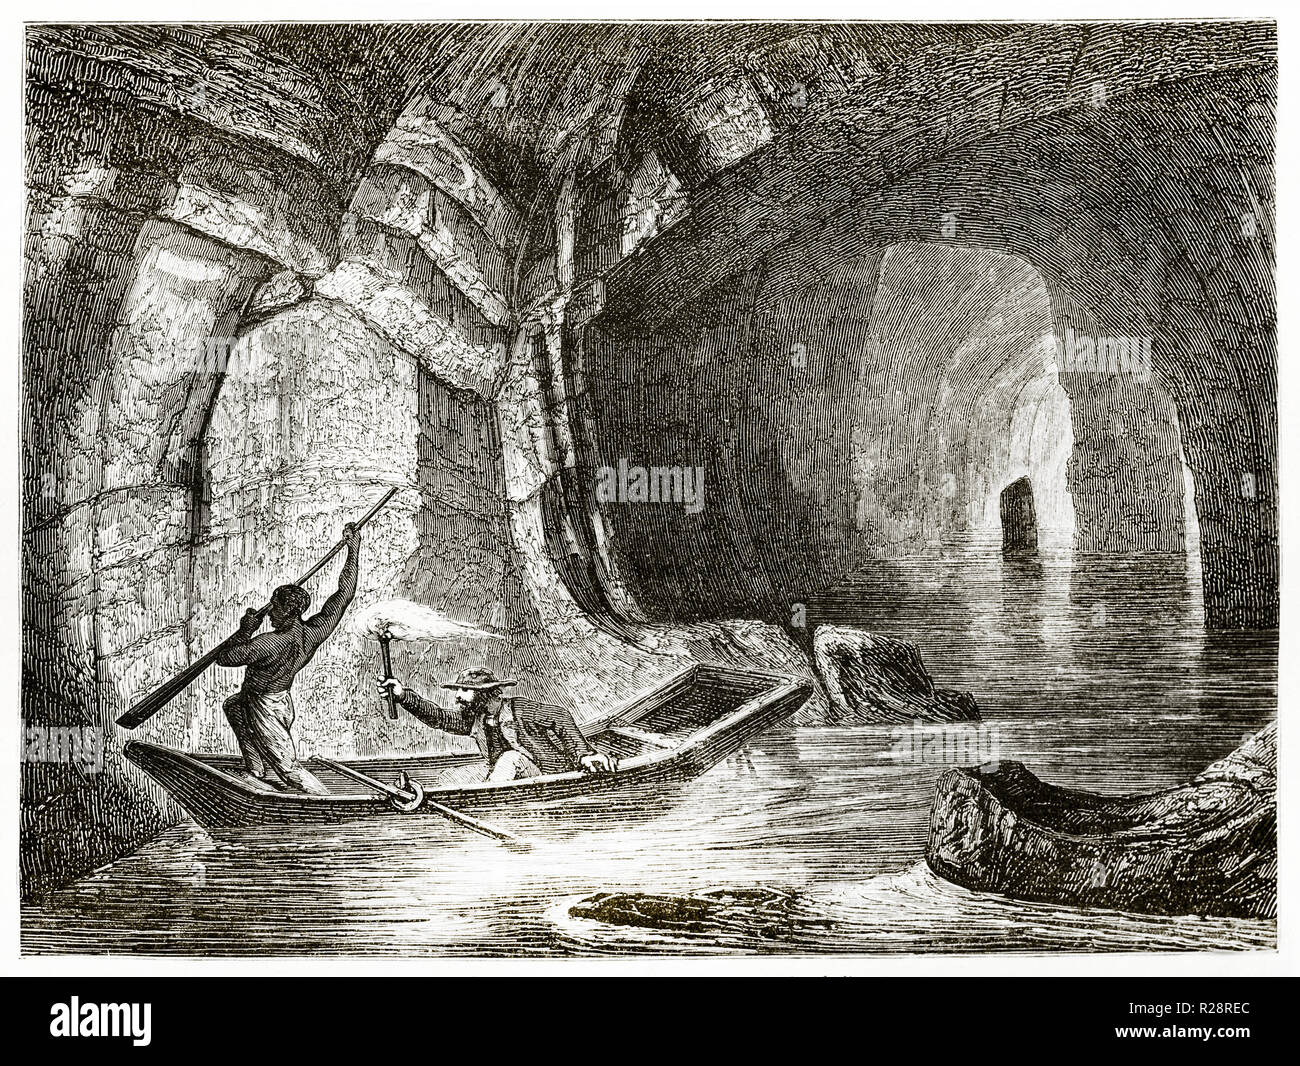 Old view of Styx river in Mammoth Cave, Kentucky. By Gambard after Deville, publ. on le Tour du Monde, Paris, 1863 Stock Photo